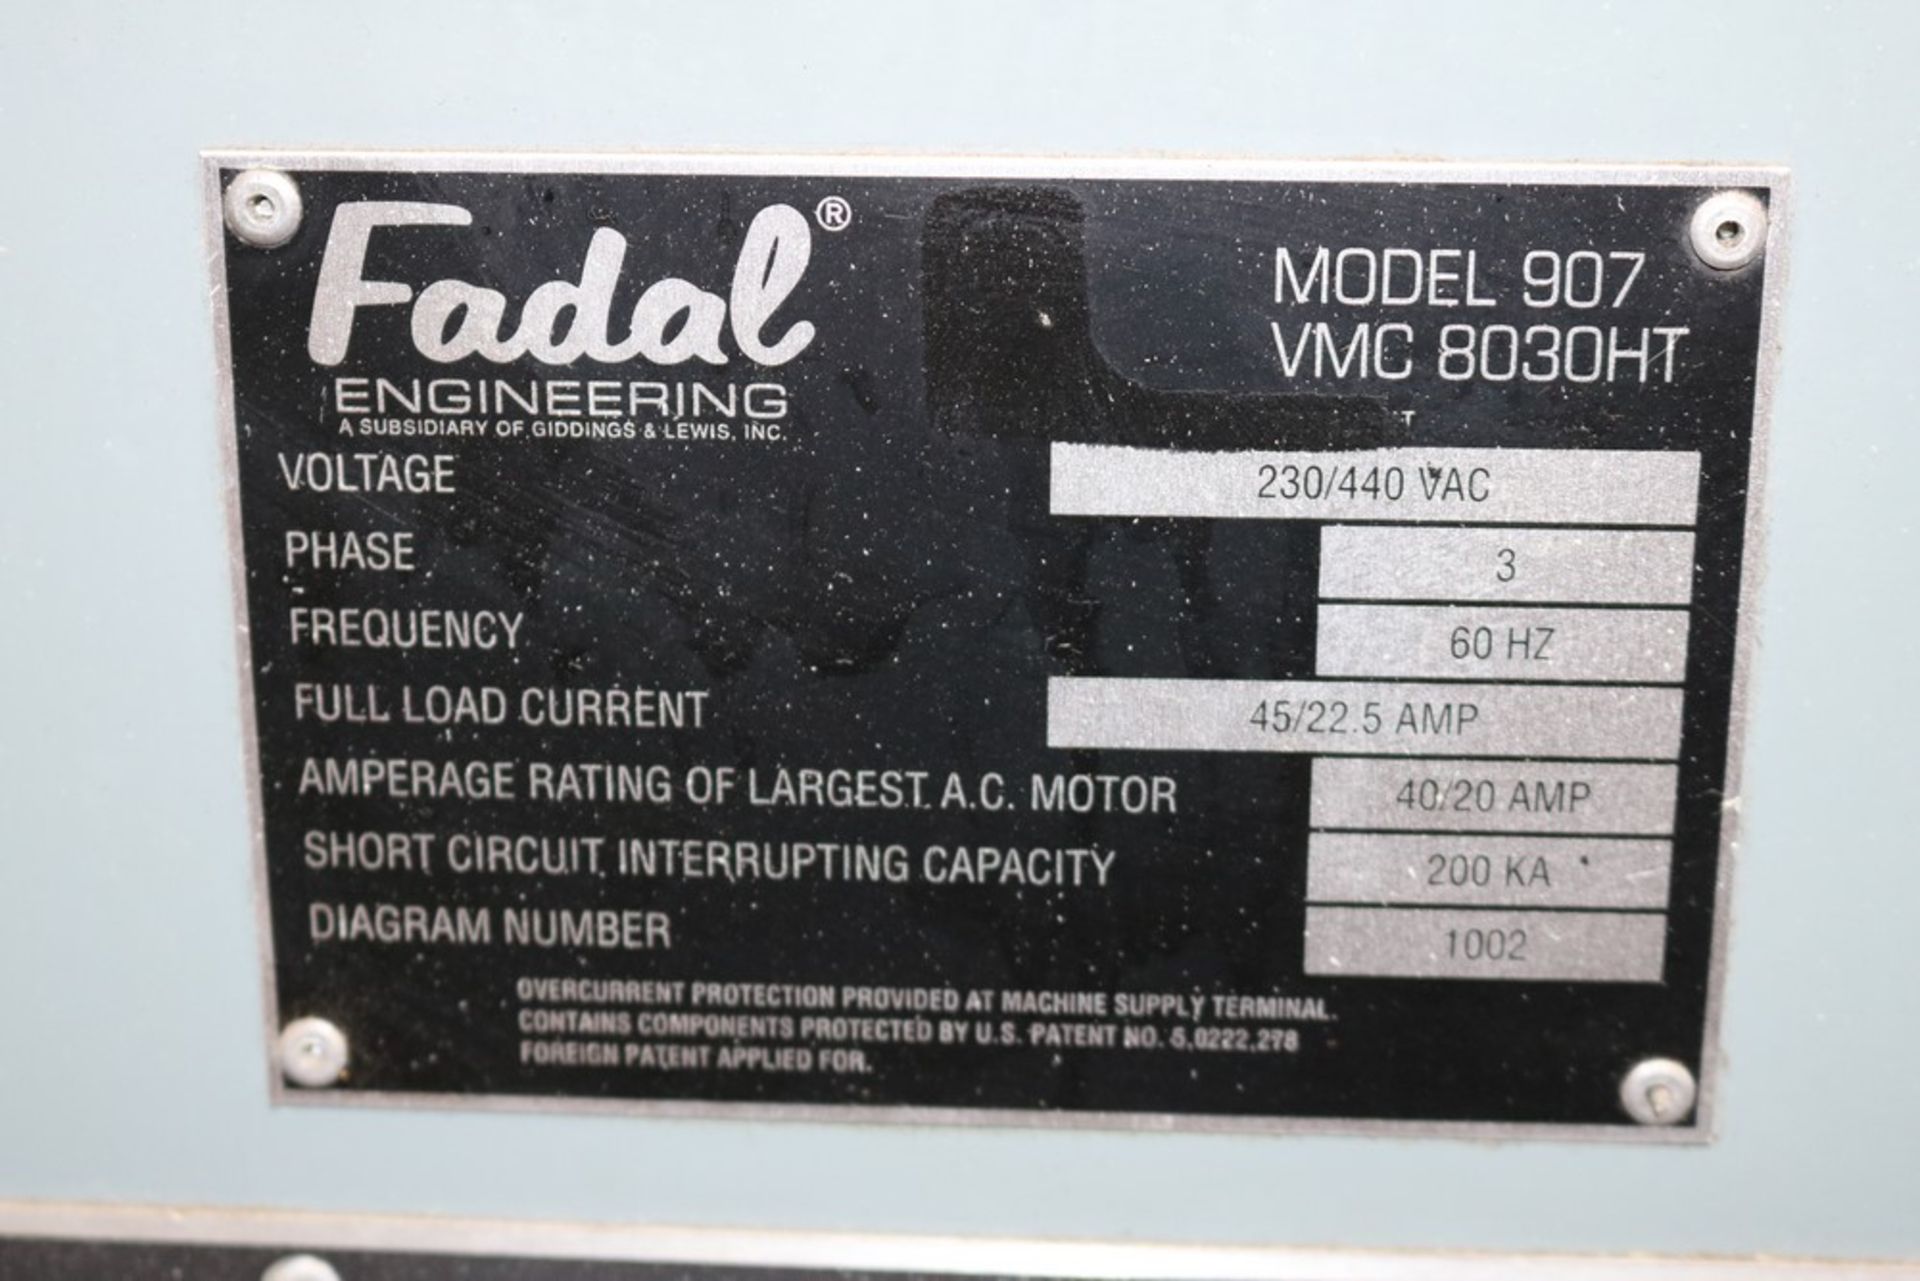 1998 Fadal 8030 CNC Vertical Machining Center Calmotion 527F Control 30 ATC, 10,000 RPM, Fully - Image 17 of 21